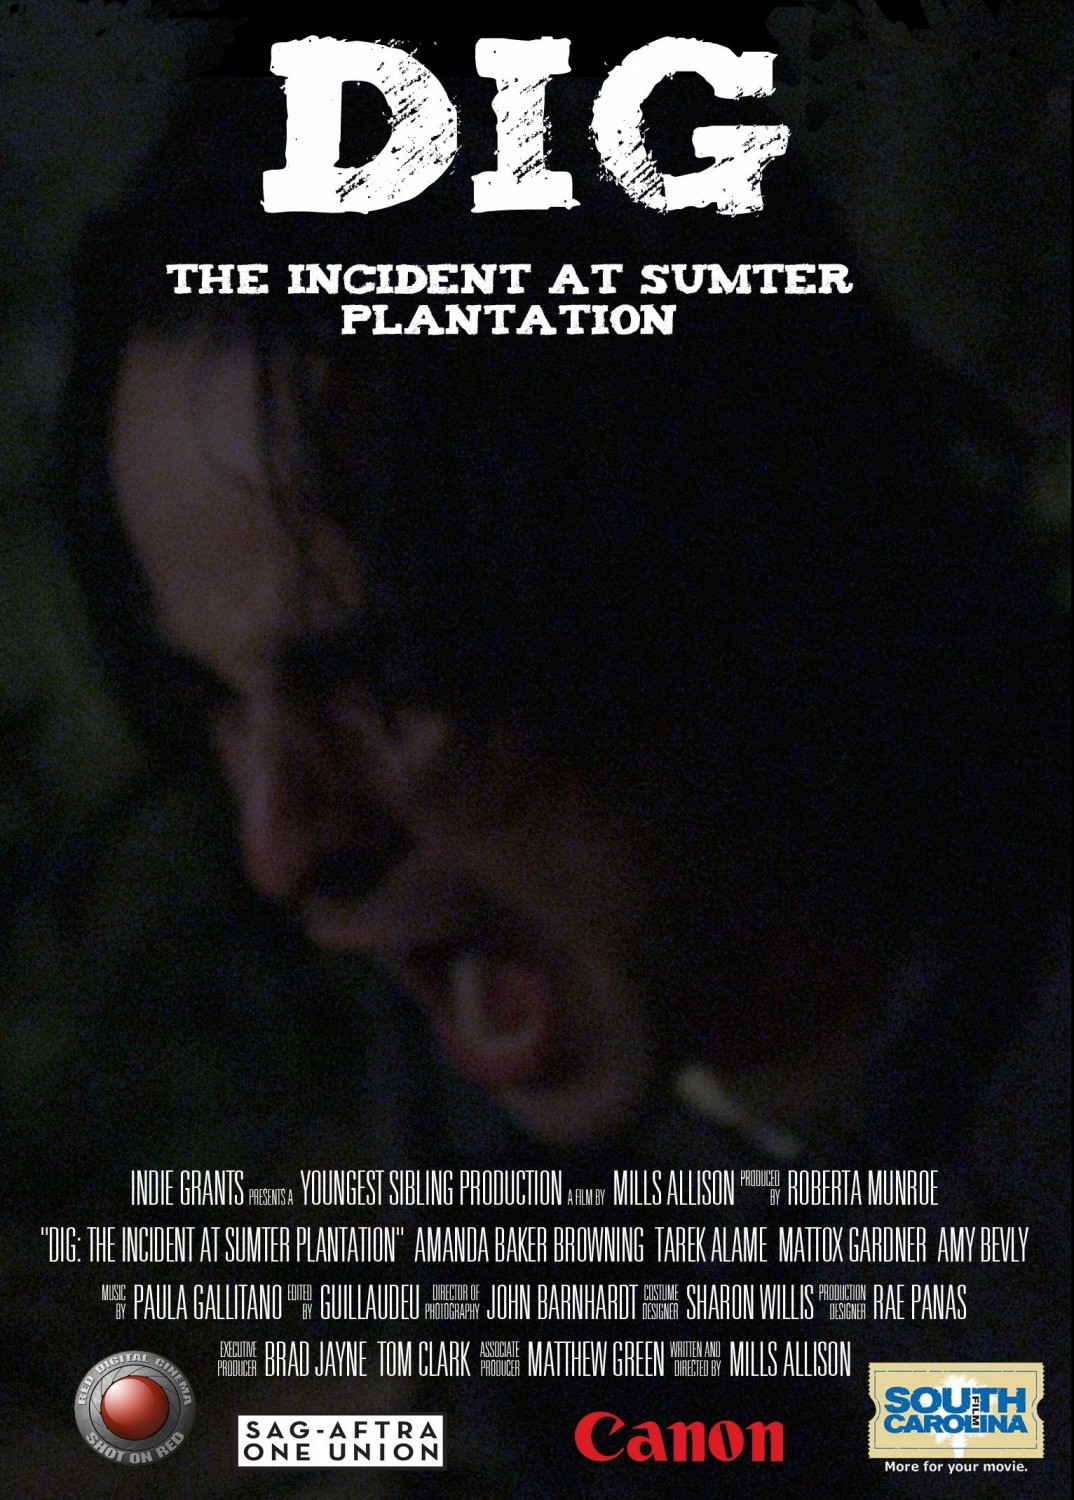 Extra Large Movie Poster Image for Dig: The Incident at Sumter Plantation